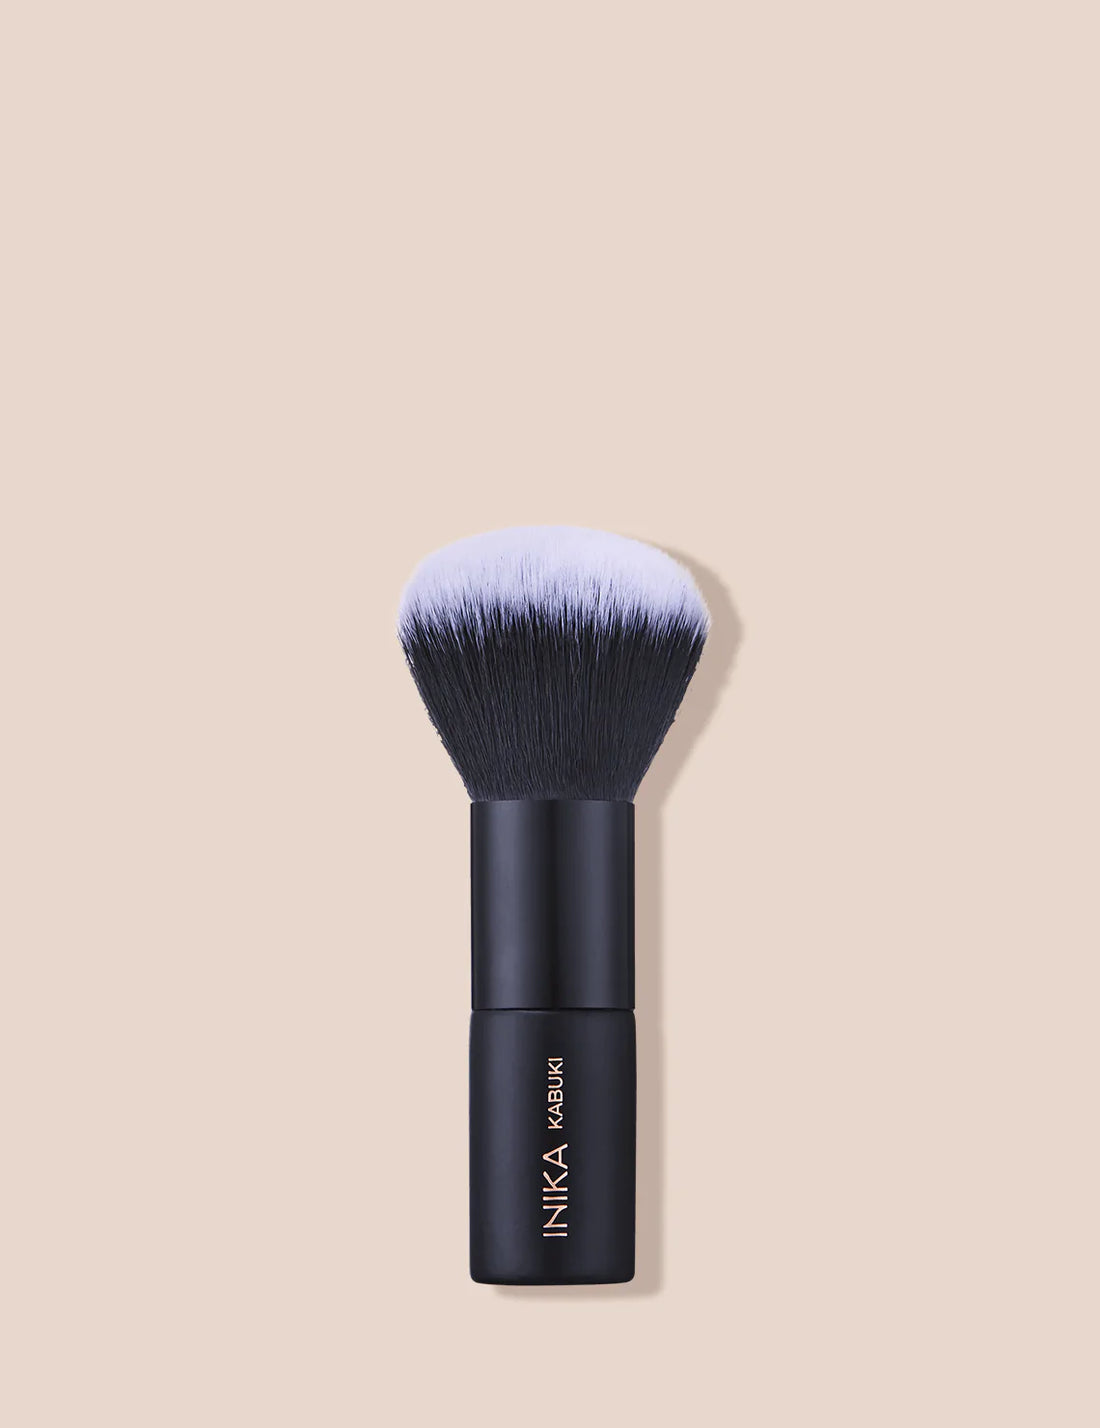 INIKA Kabuki brush for face application with mineral powders